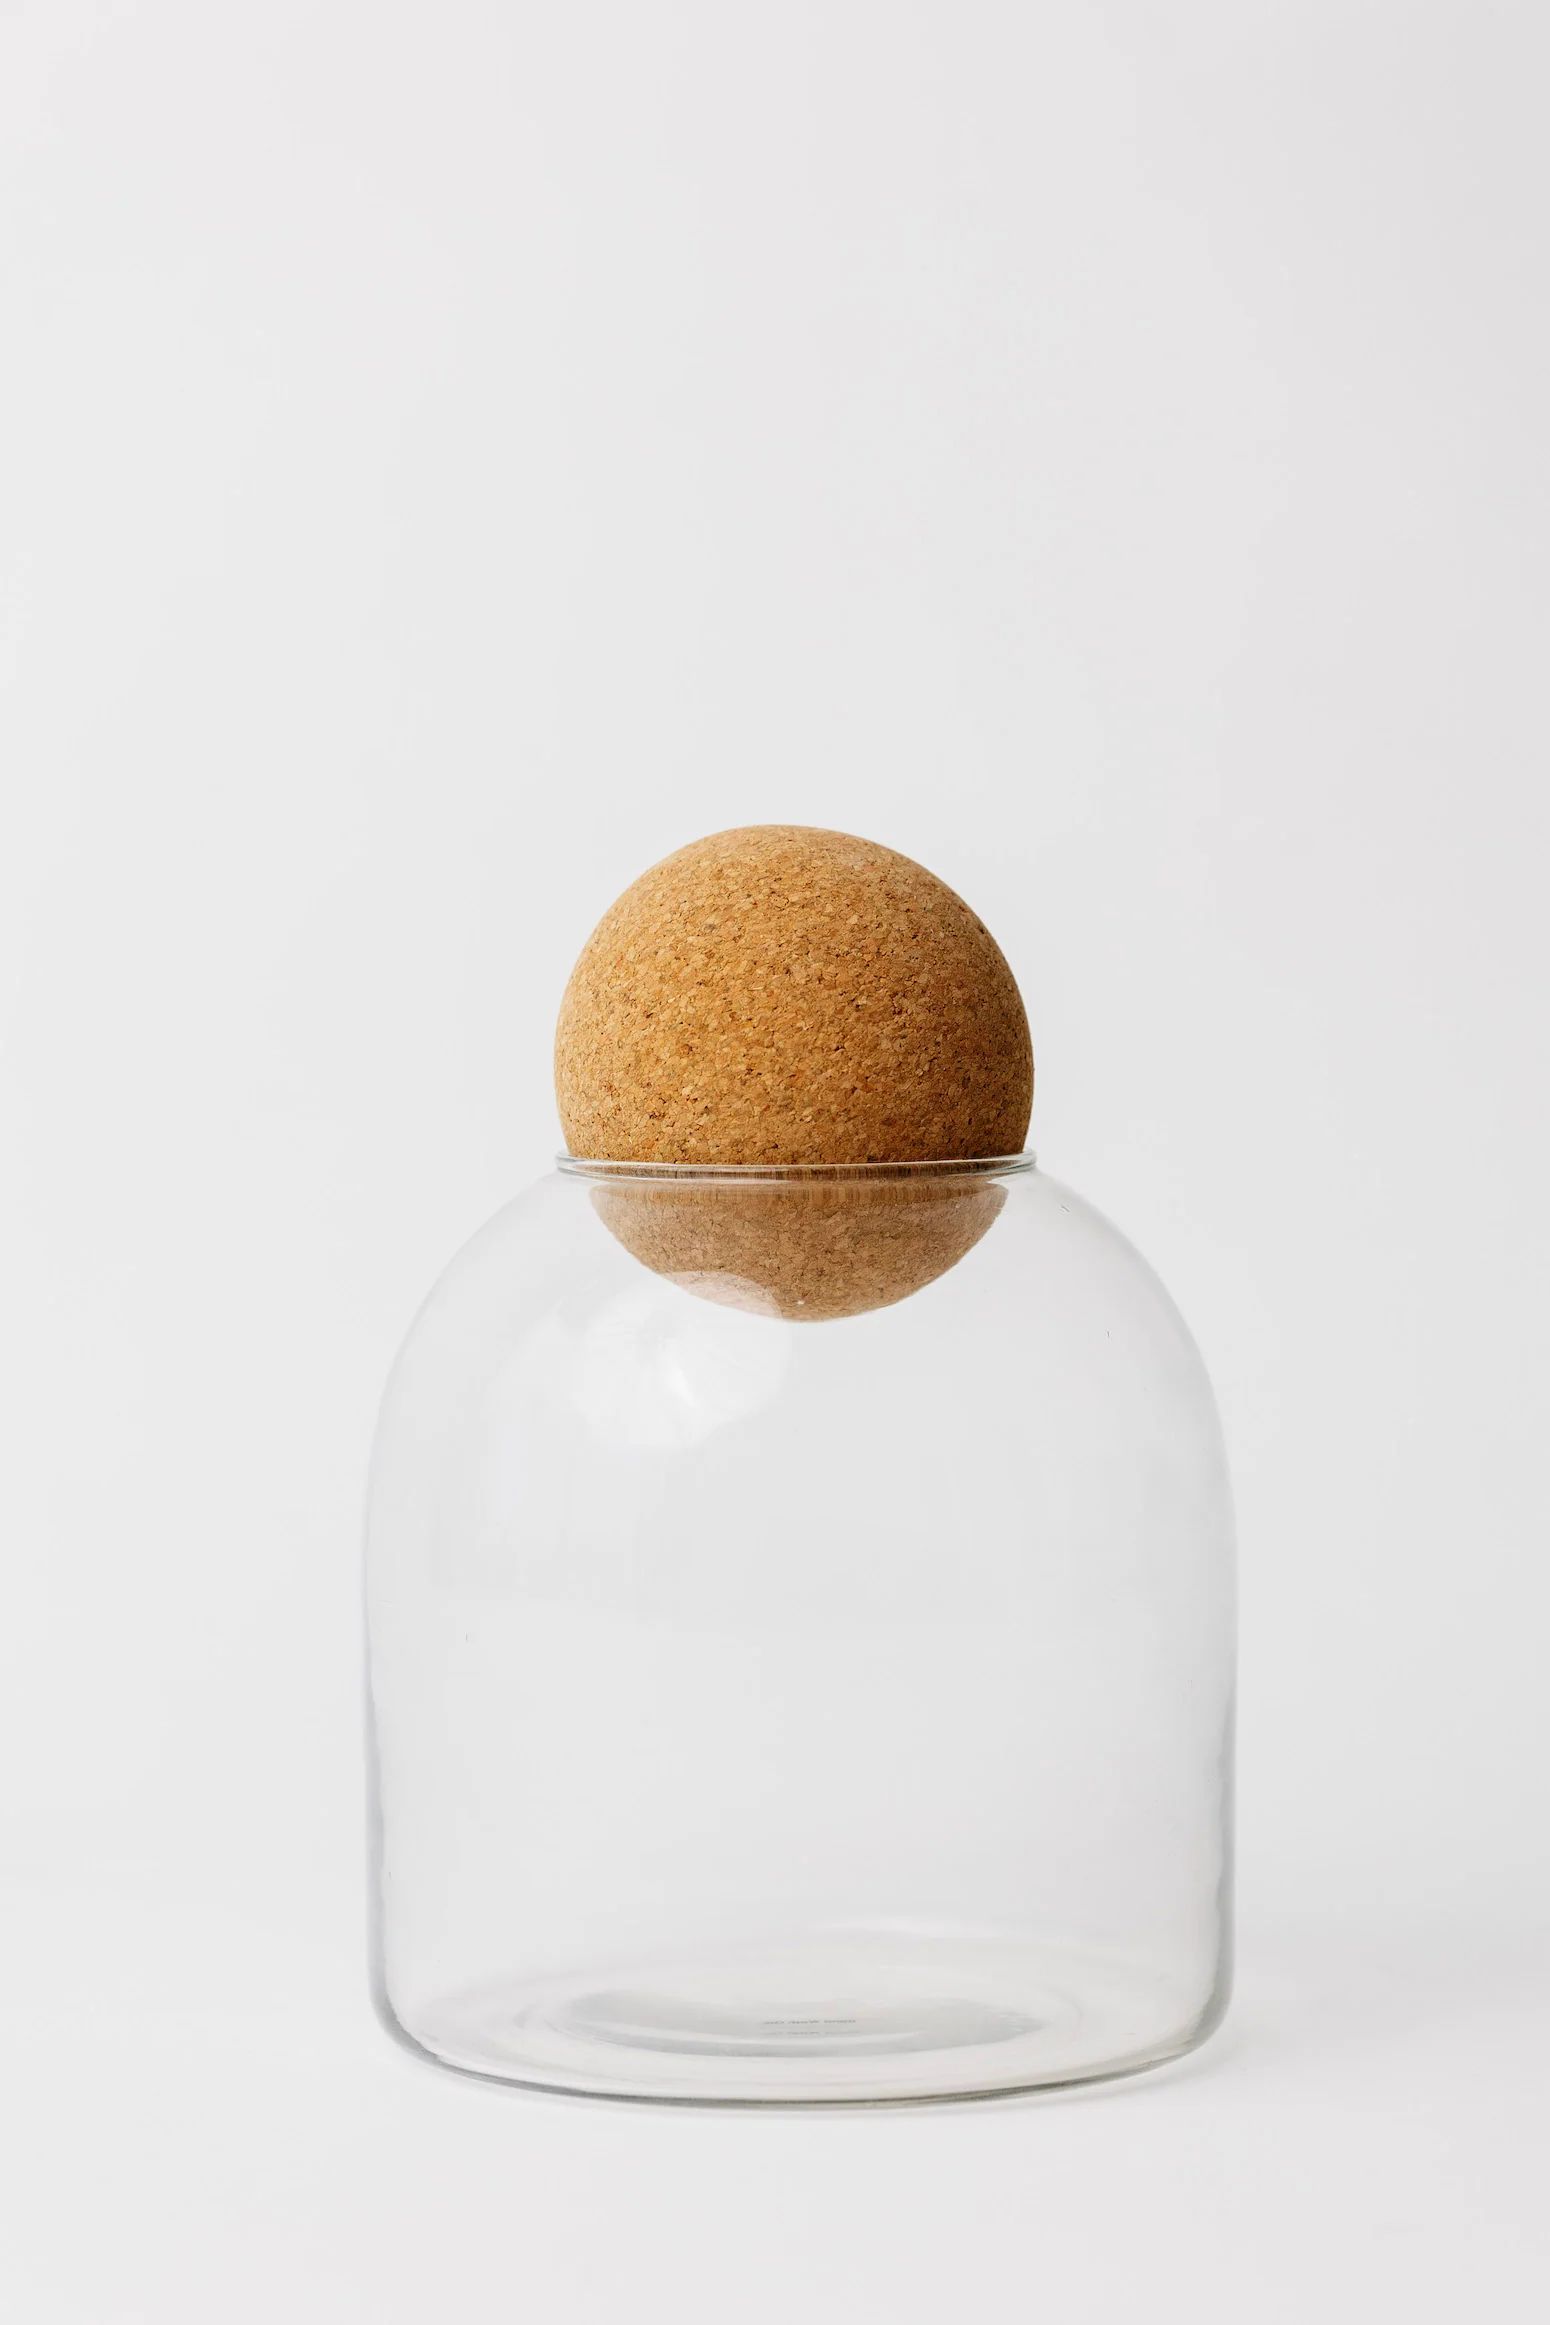 Reeves Canister w Cork Lid - 2 Sizes | THELIFESTYLEDCO